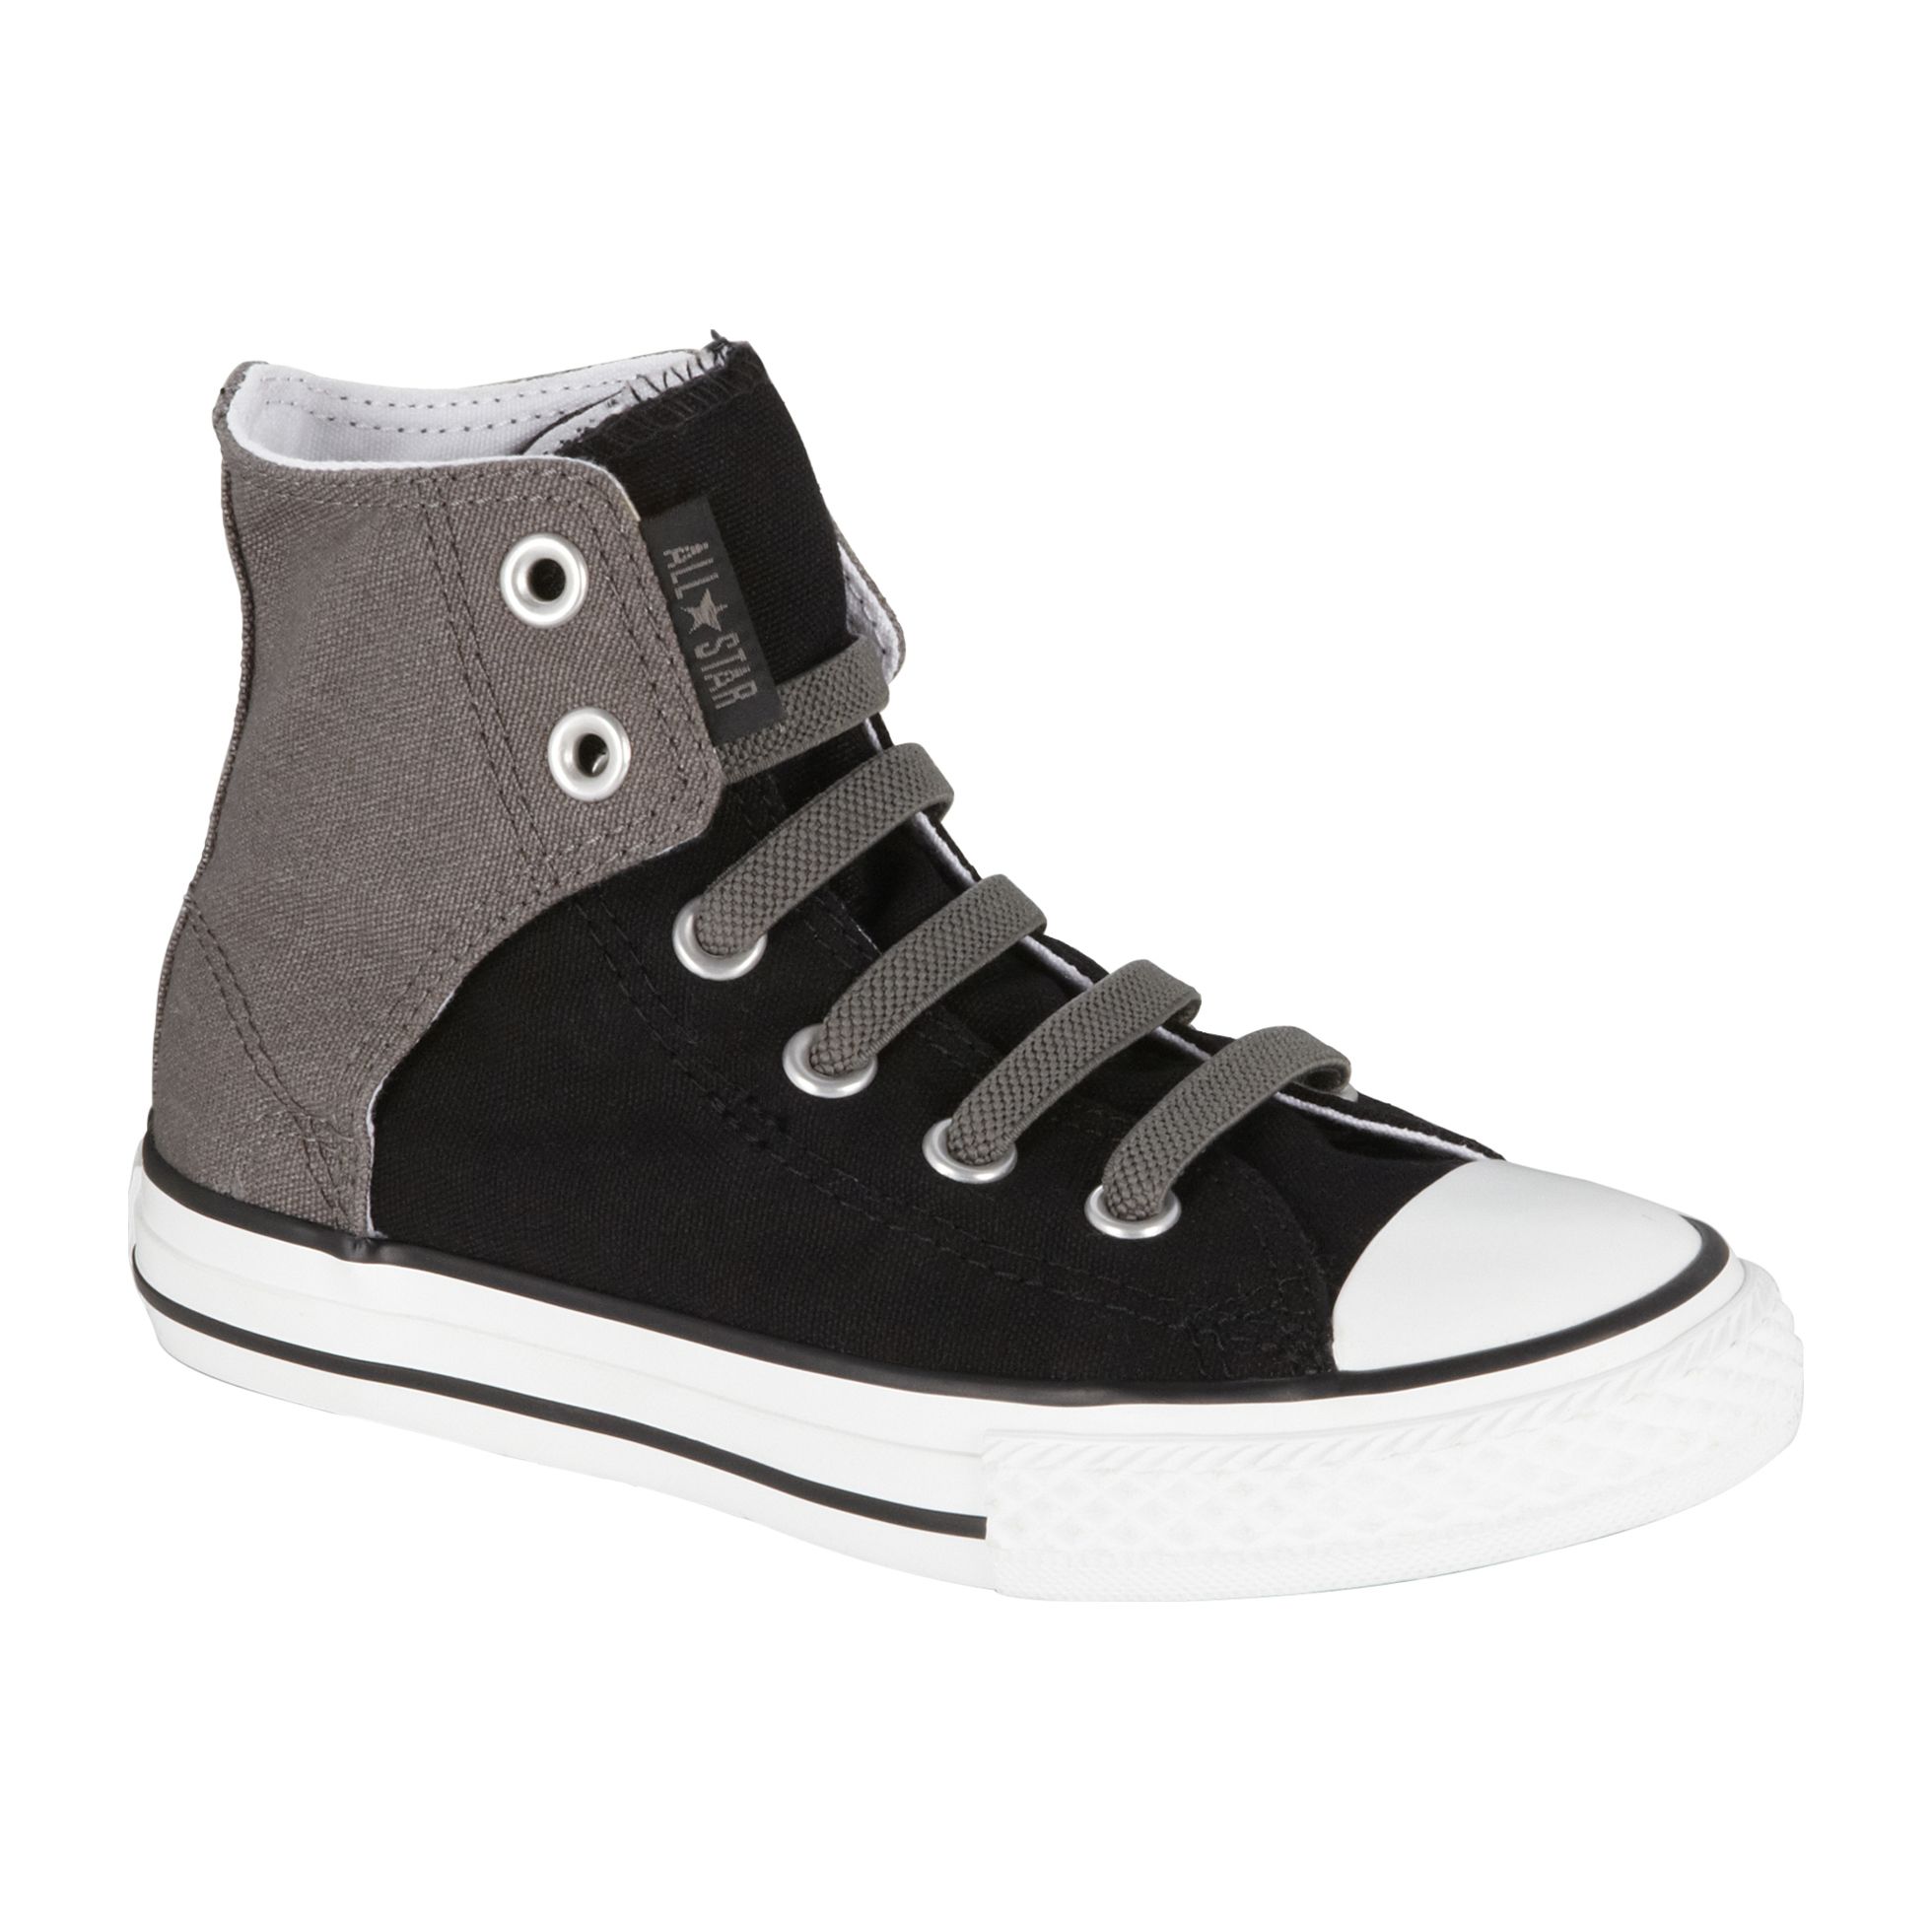 Baby Converse Shoes: Converse Youth Chuck Taylor Easy Slip Hi Top Sneaker -  Black 11 - (Toddler/Youth) ;12 - (Toddler/Youth) ;13 - (Toddler/Youth) ;1 -  (Youth) ;2 - (Youth) ;3 - (Youth) ;